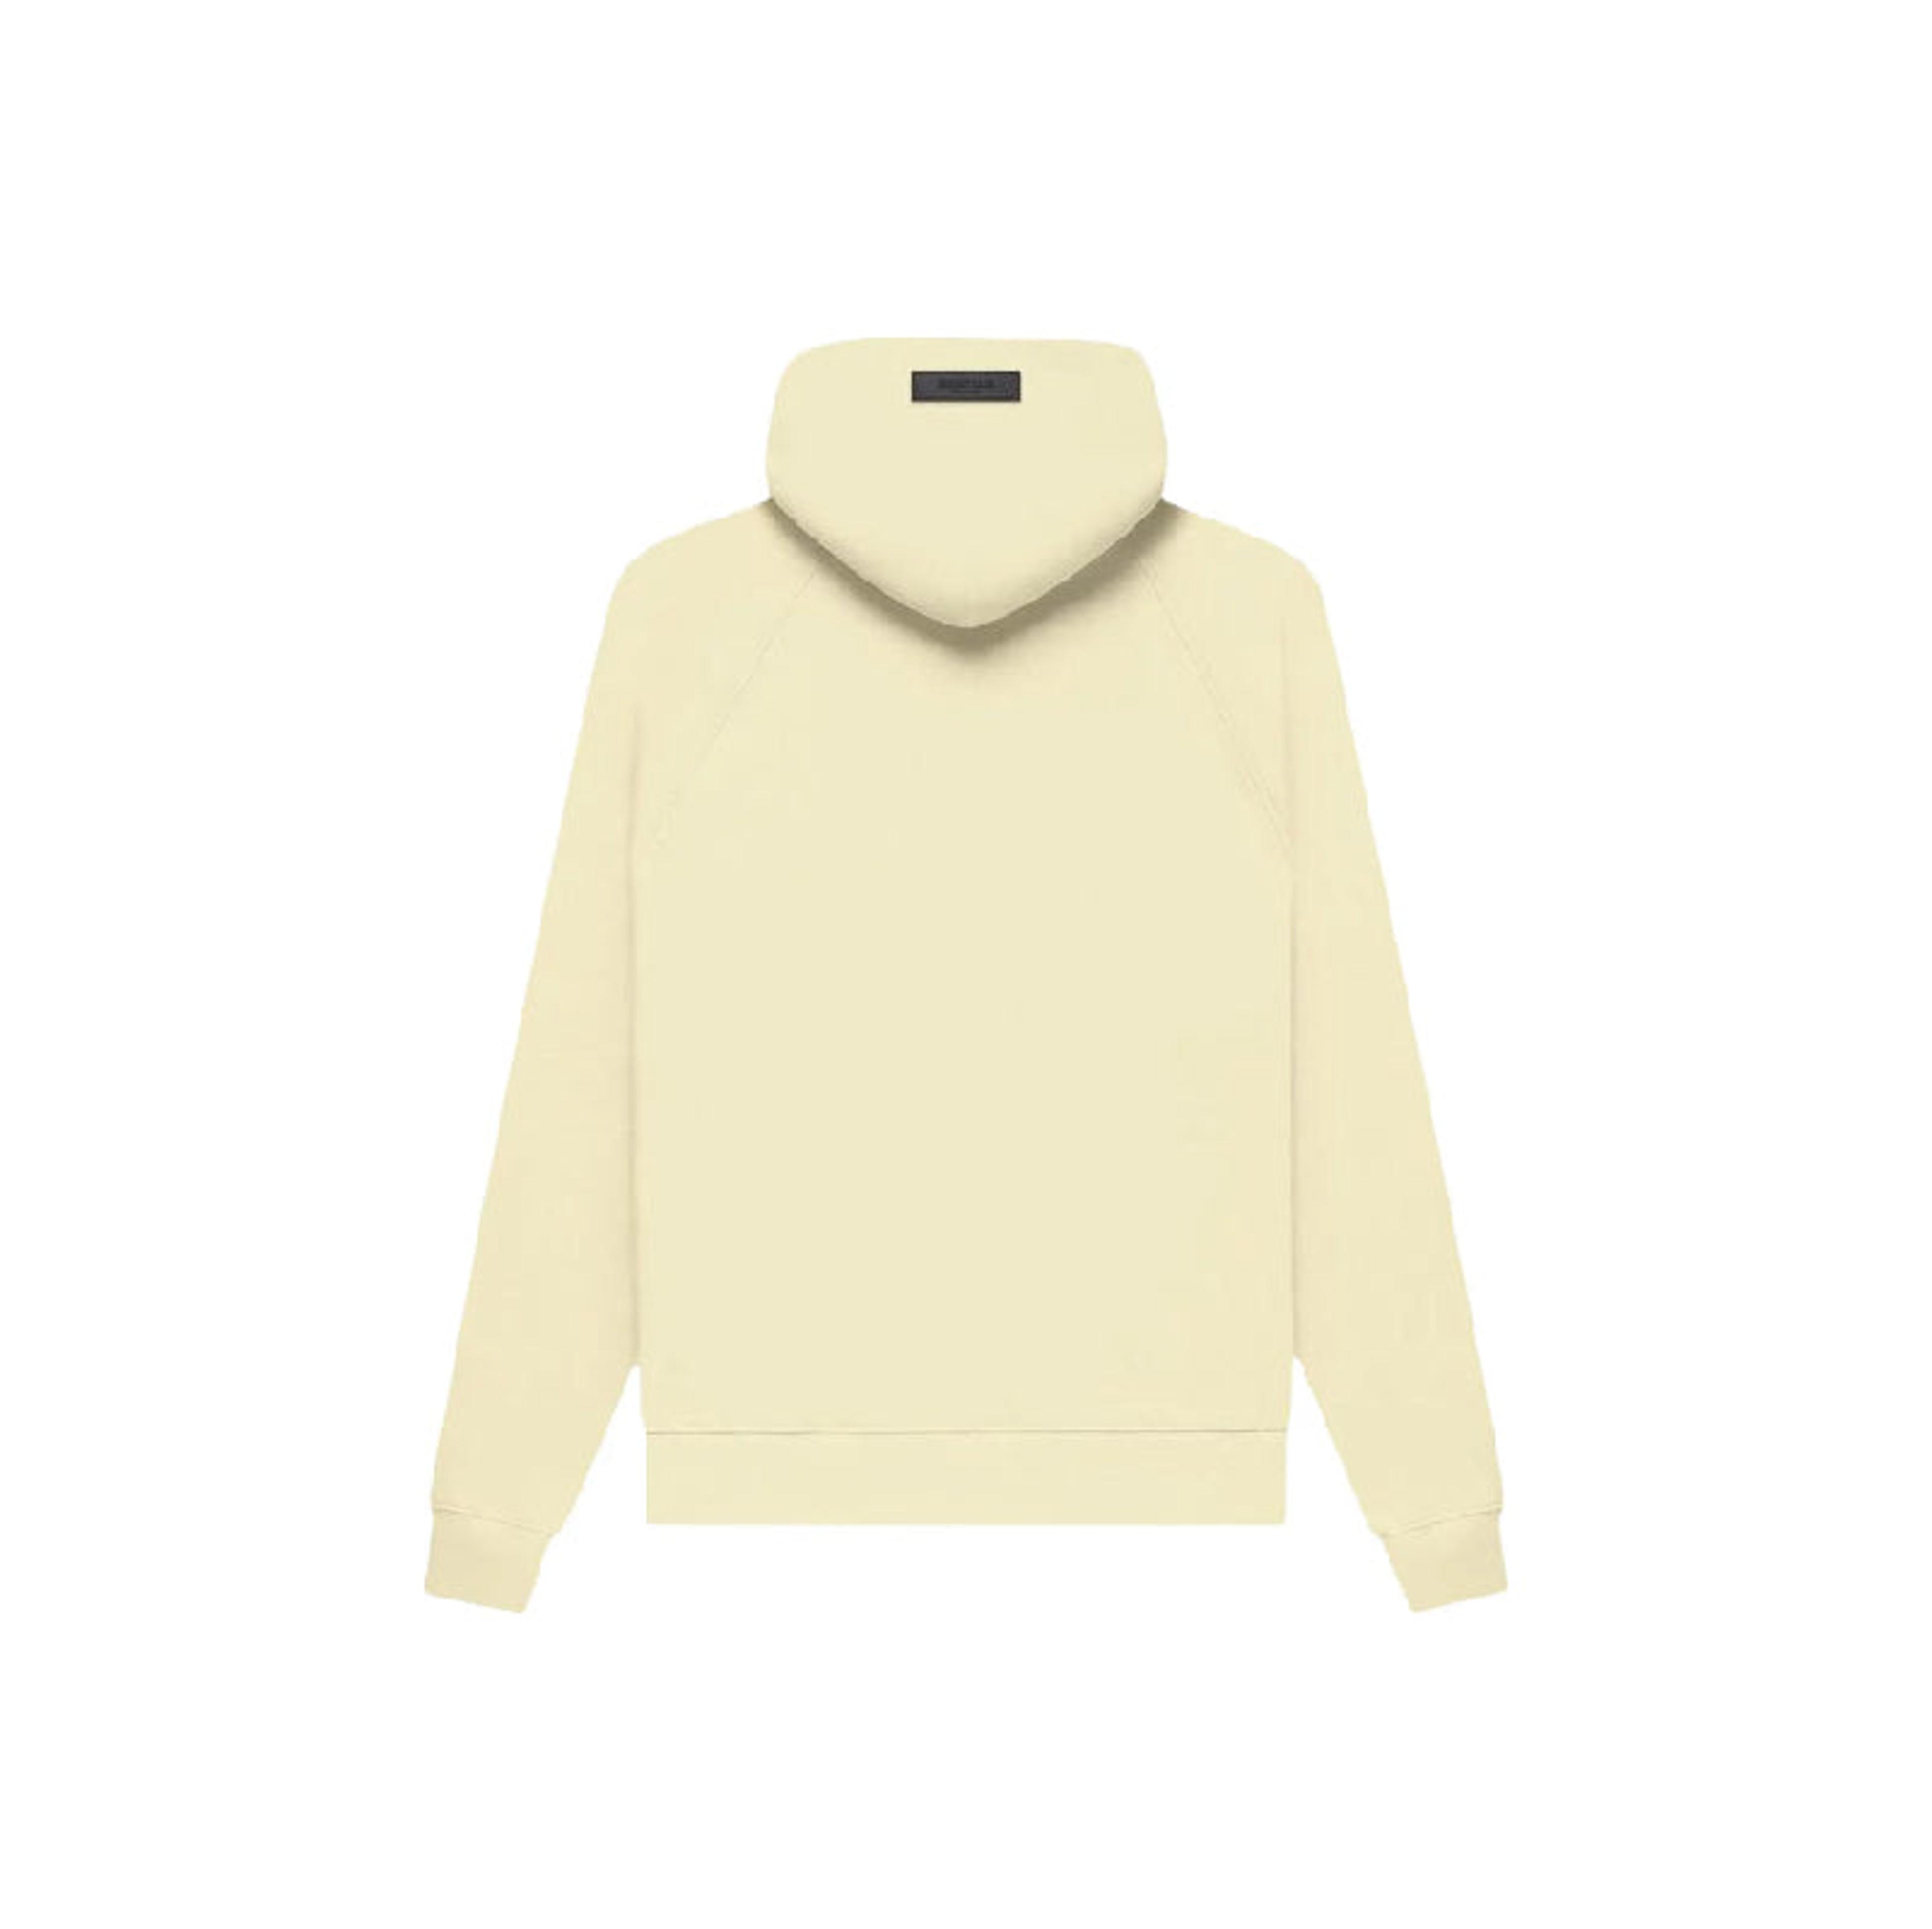 Alternate View 1 of Fear of God Essentials Hoodie 'Canary'